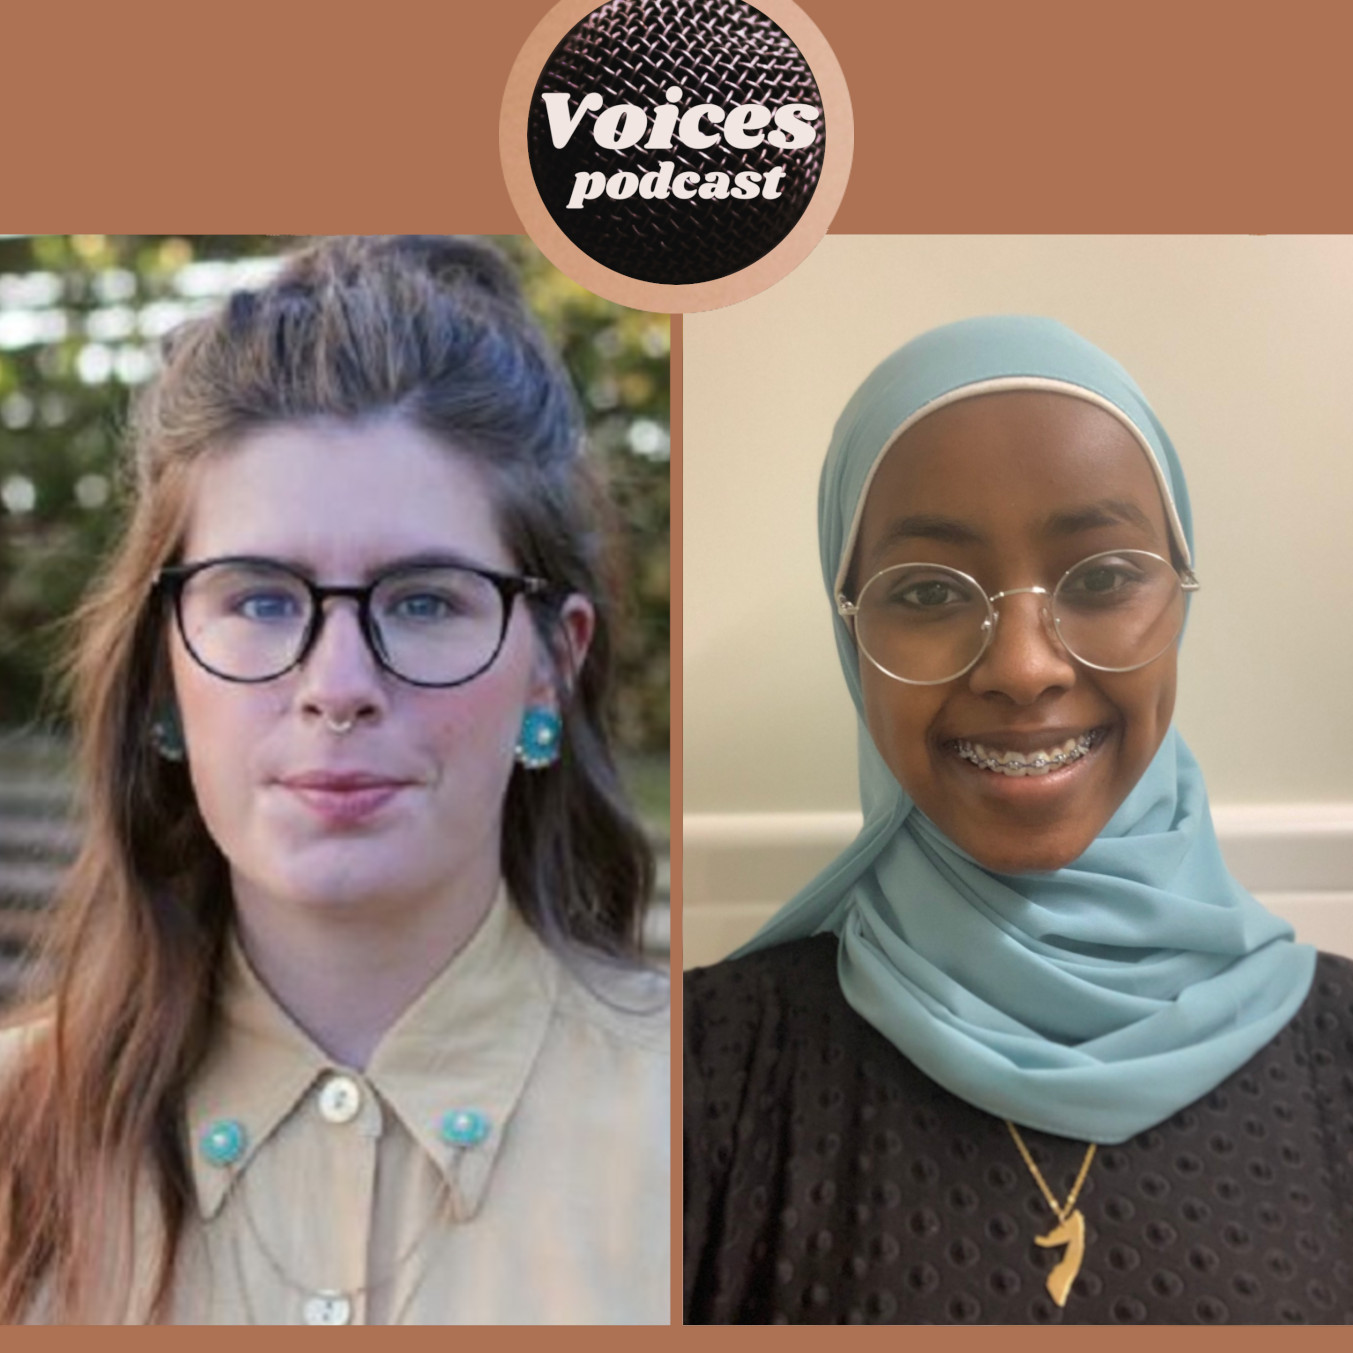 Jessica Johns and Yusra Ali with the Voices Podcast logo